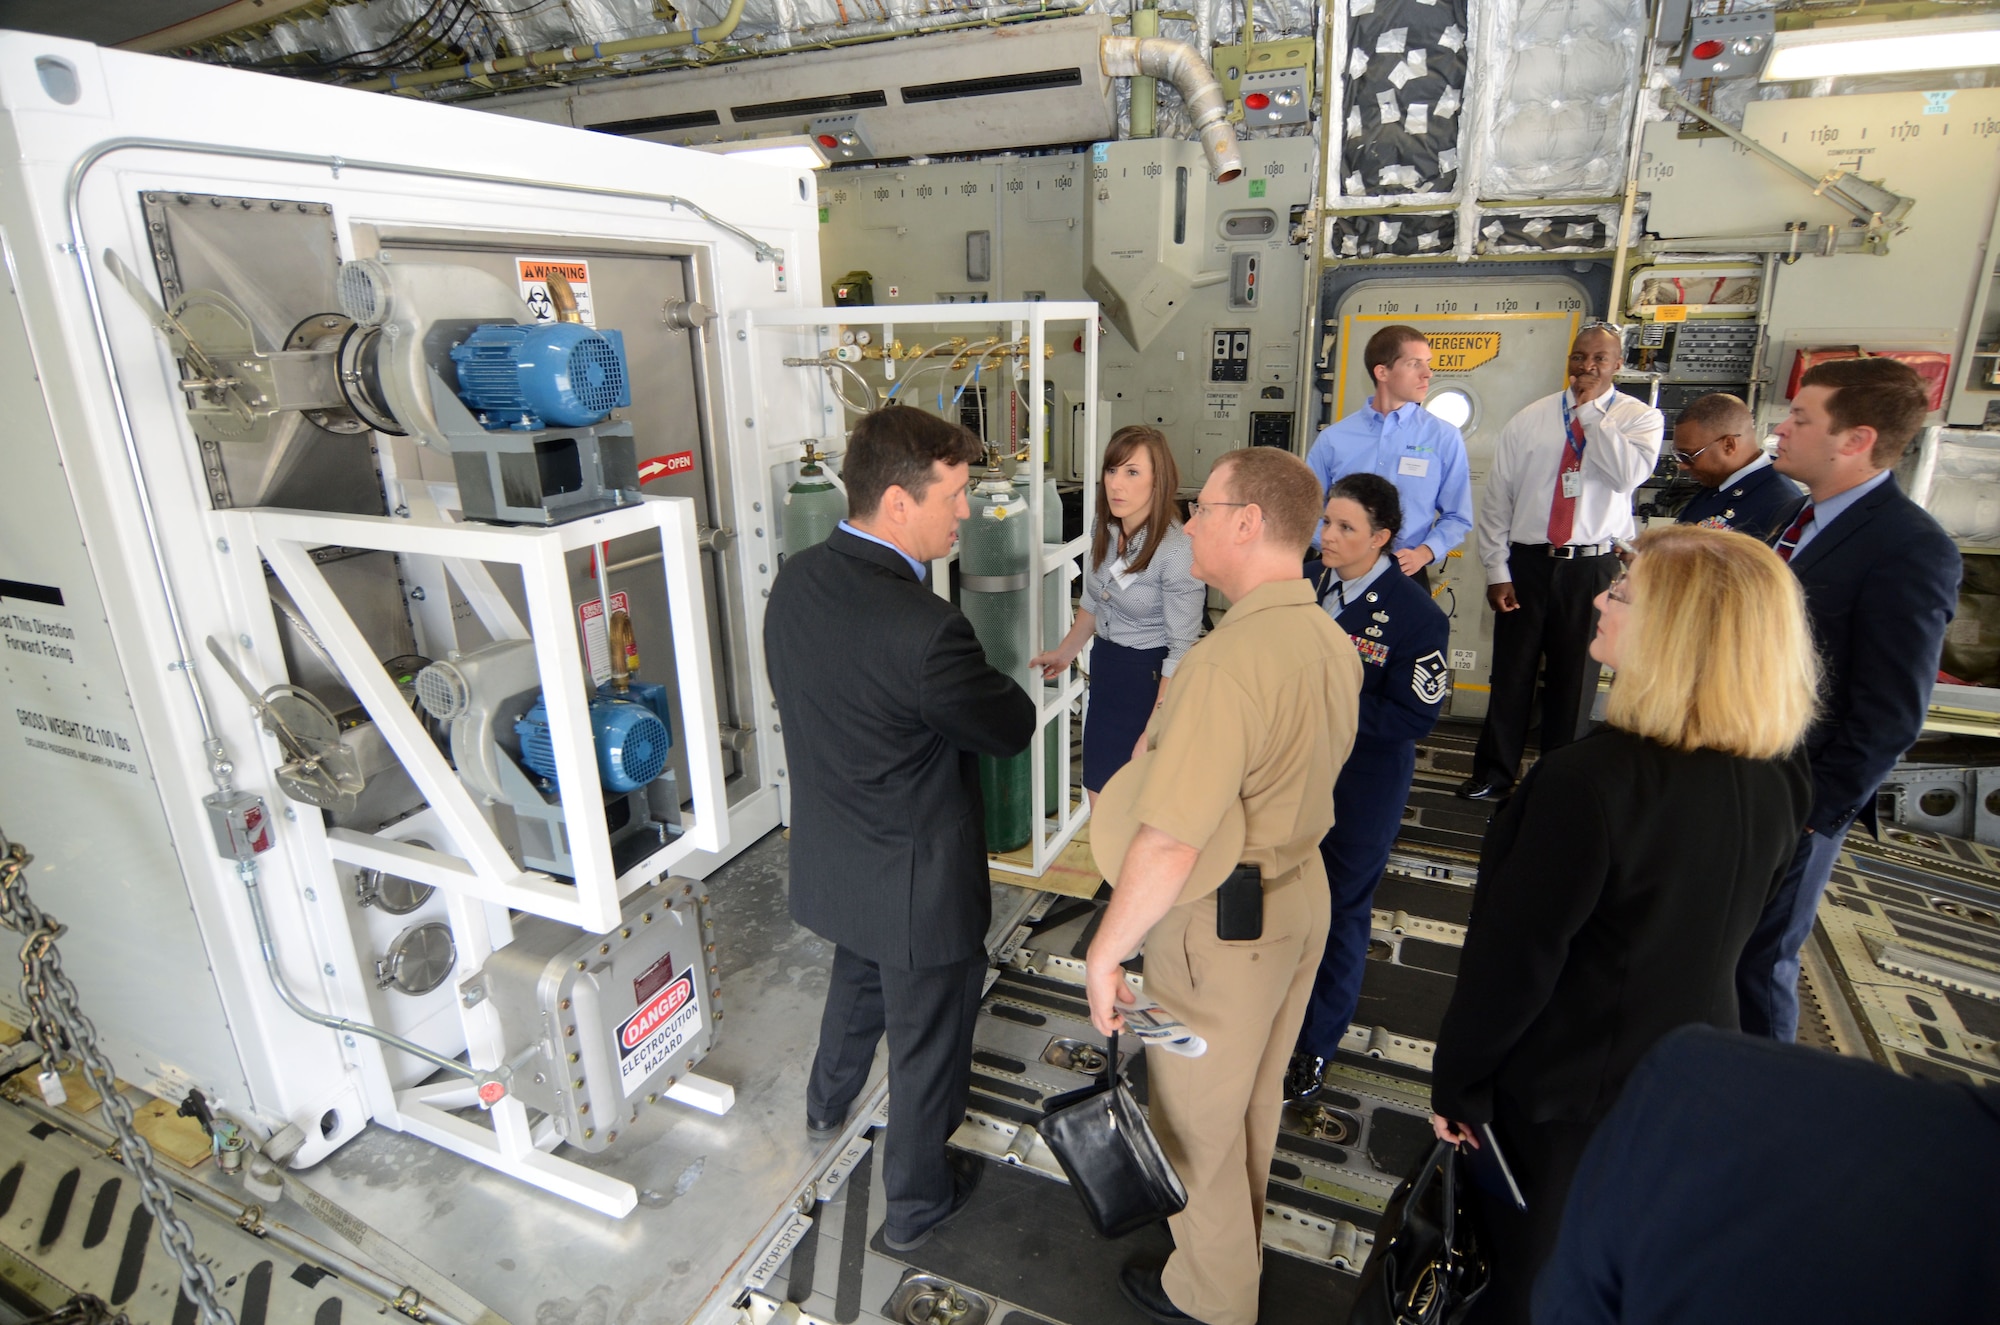 Congressional staff members receive a tour through one of two of the DOS Containerized Biocontainment Systems presented at an unveiling ceremony held at Dobbins Air Reserve Base, Ga. Aug. 11, 2015. The CBCS was loaded onto a C-17 cargo aircraft to demonstrate airlift capability. (U.S. Air Force photo/Don Peek)